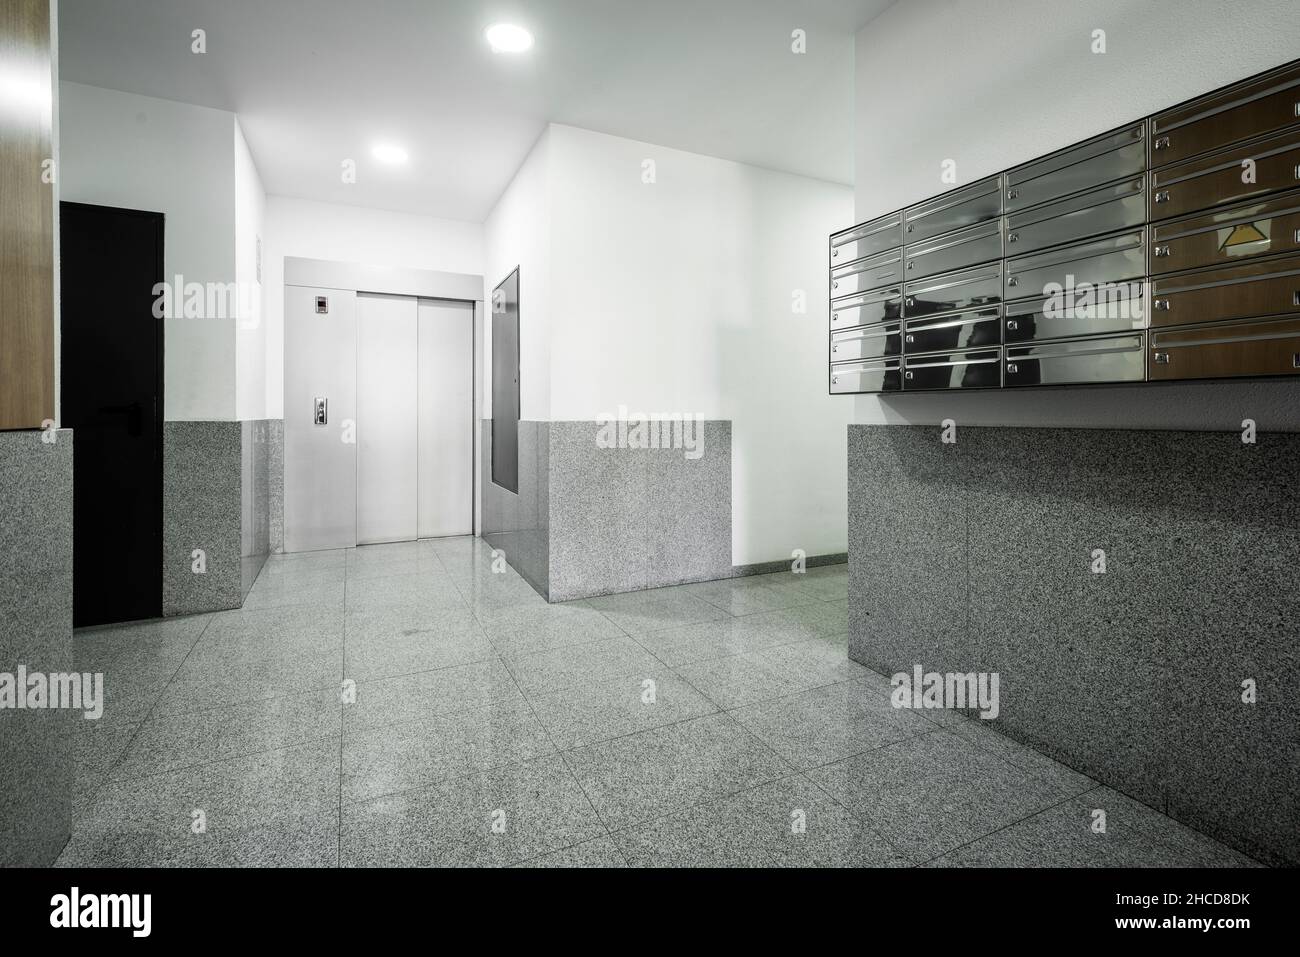 Building portal with metal mailboxes, granite floors and gray elevator in the background Stock Photo